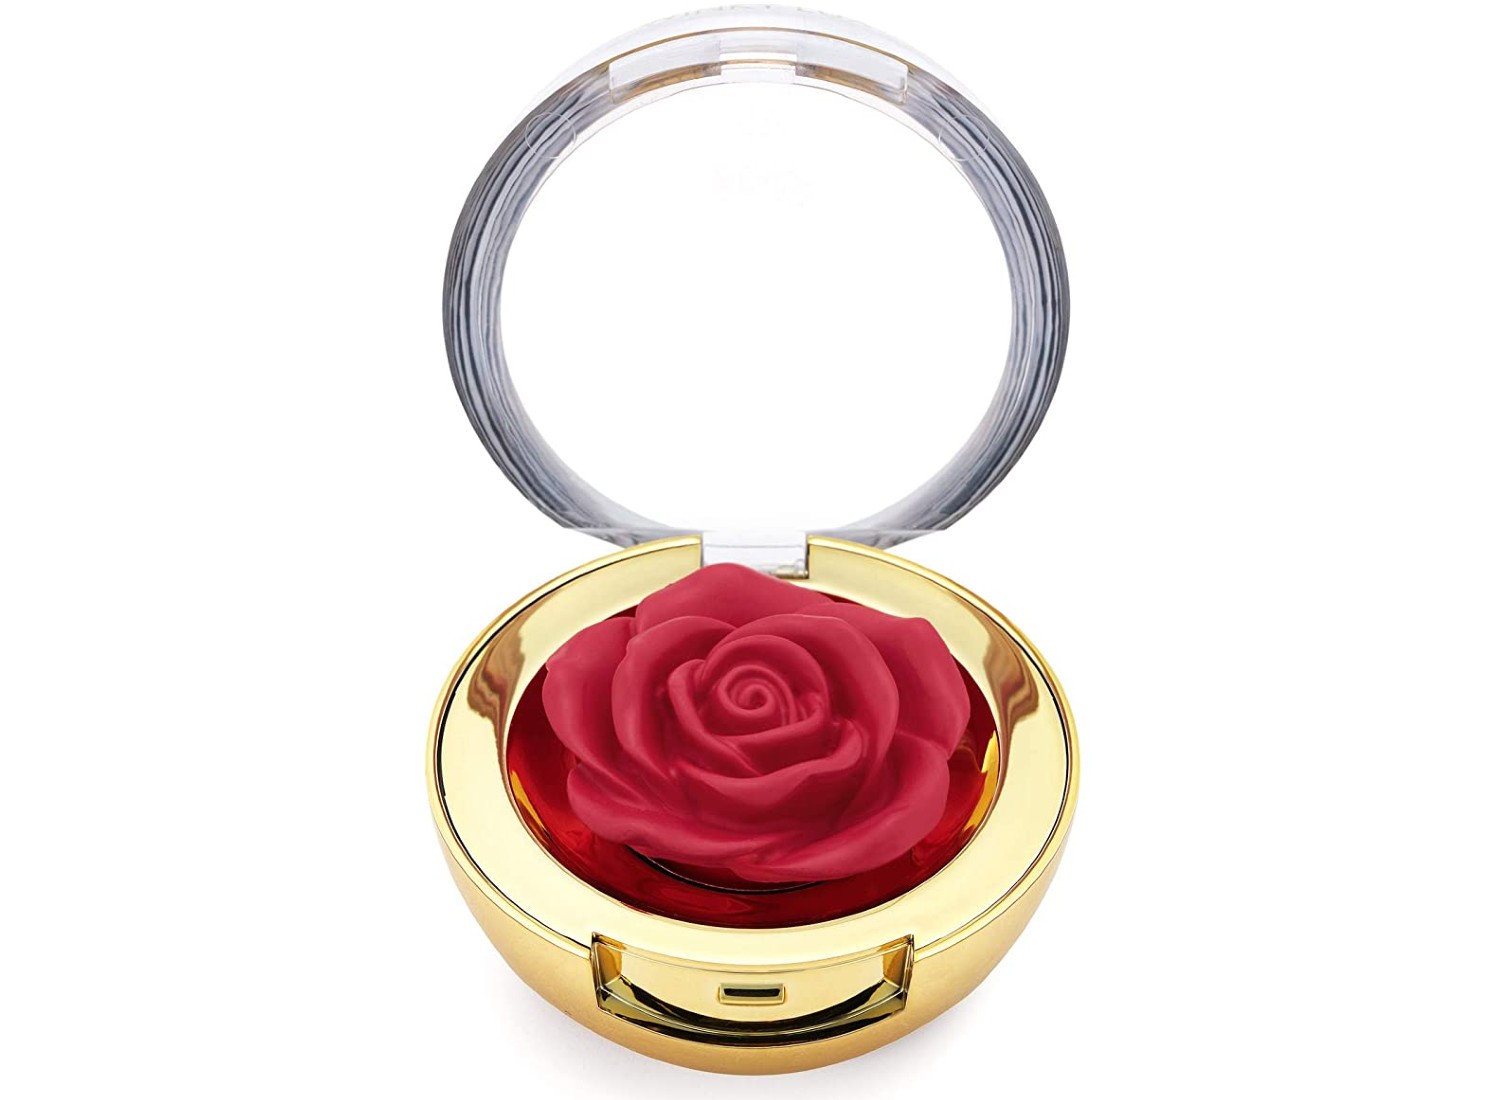 Winky Lux Cheeky Rose Flower Blush